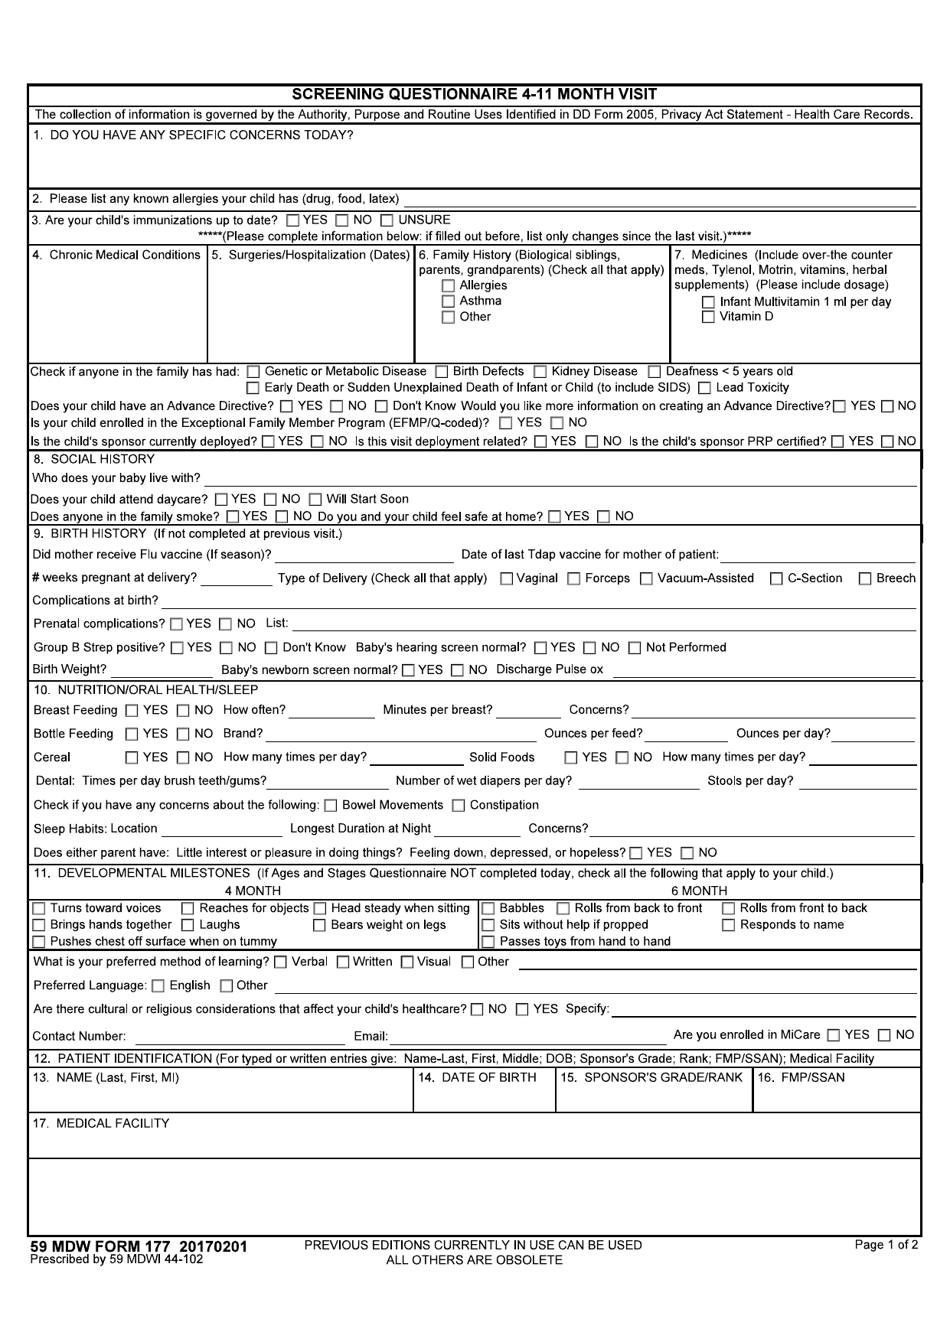 59 MDW Form 177 Screening Questionnaire 4-11 Month Visit, Page 1